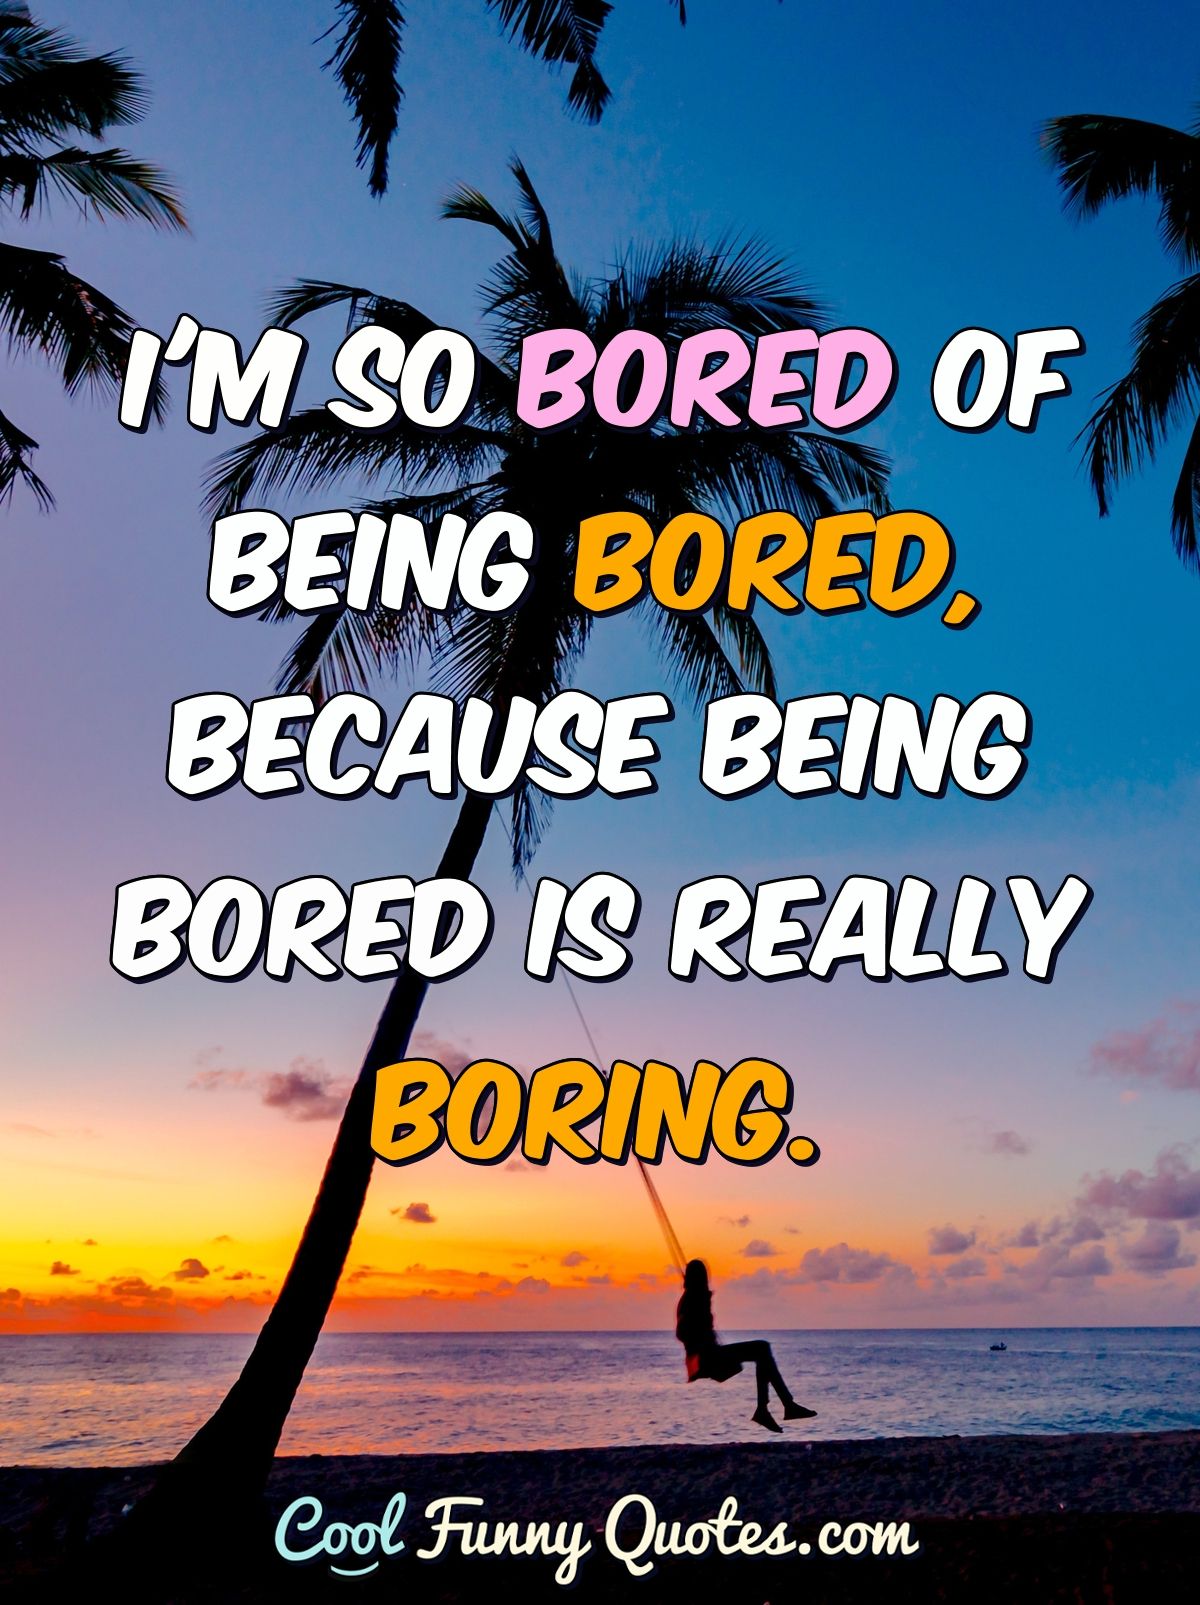 I M So Bored Of Being Bored Because Being Bored Is Really Boring